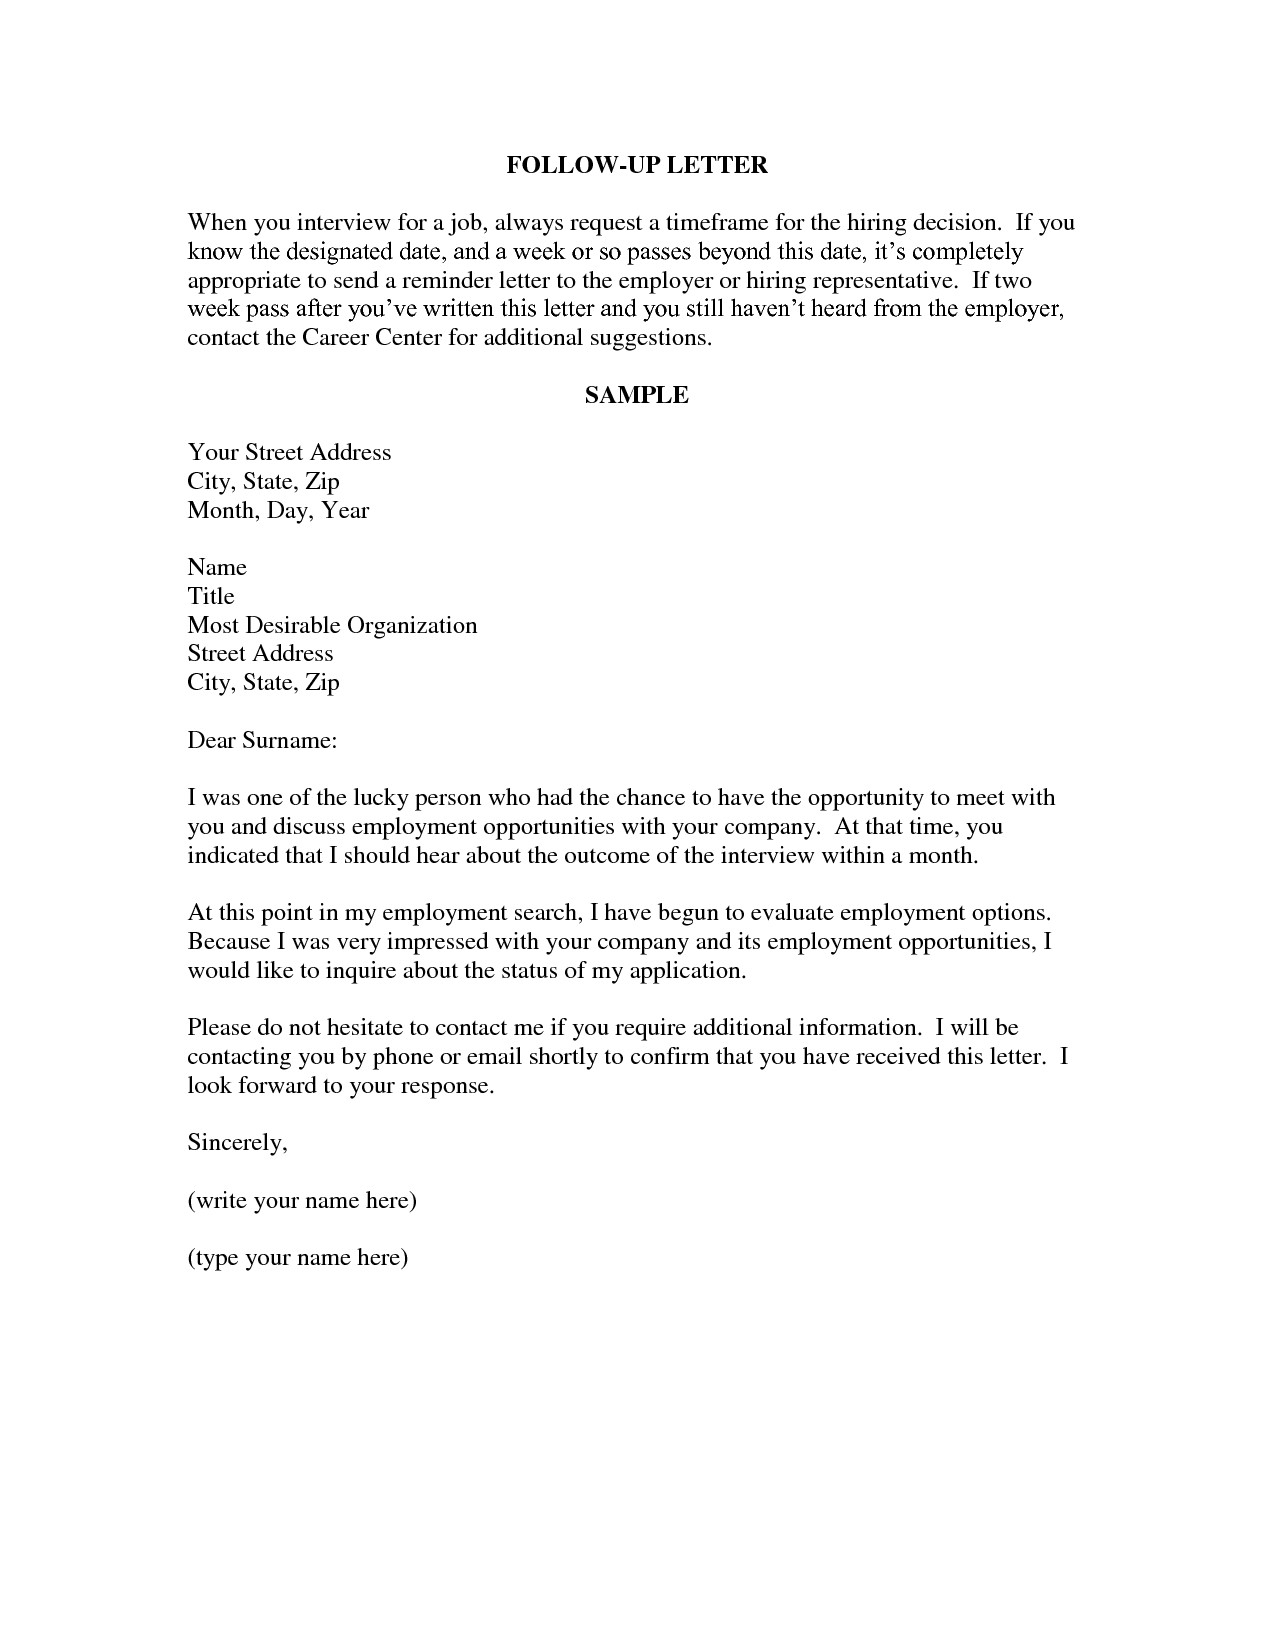 Rejection Letter Template after Interview - Interview Templates for Employers